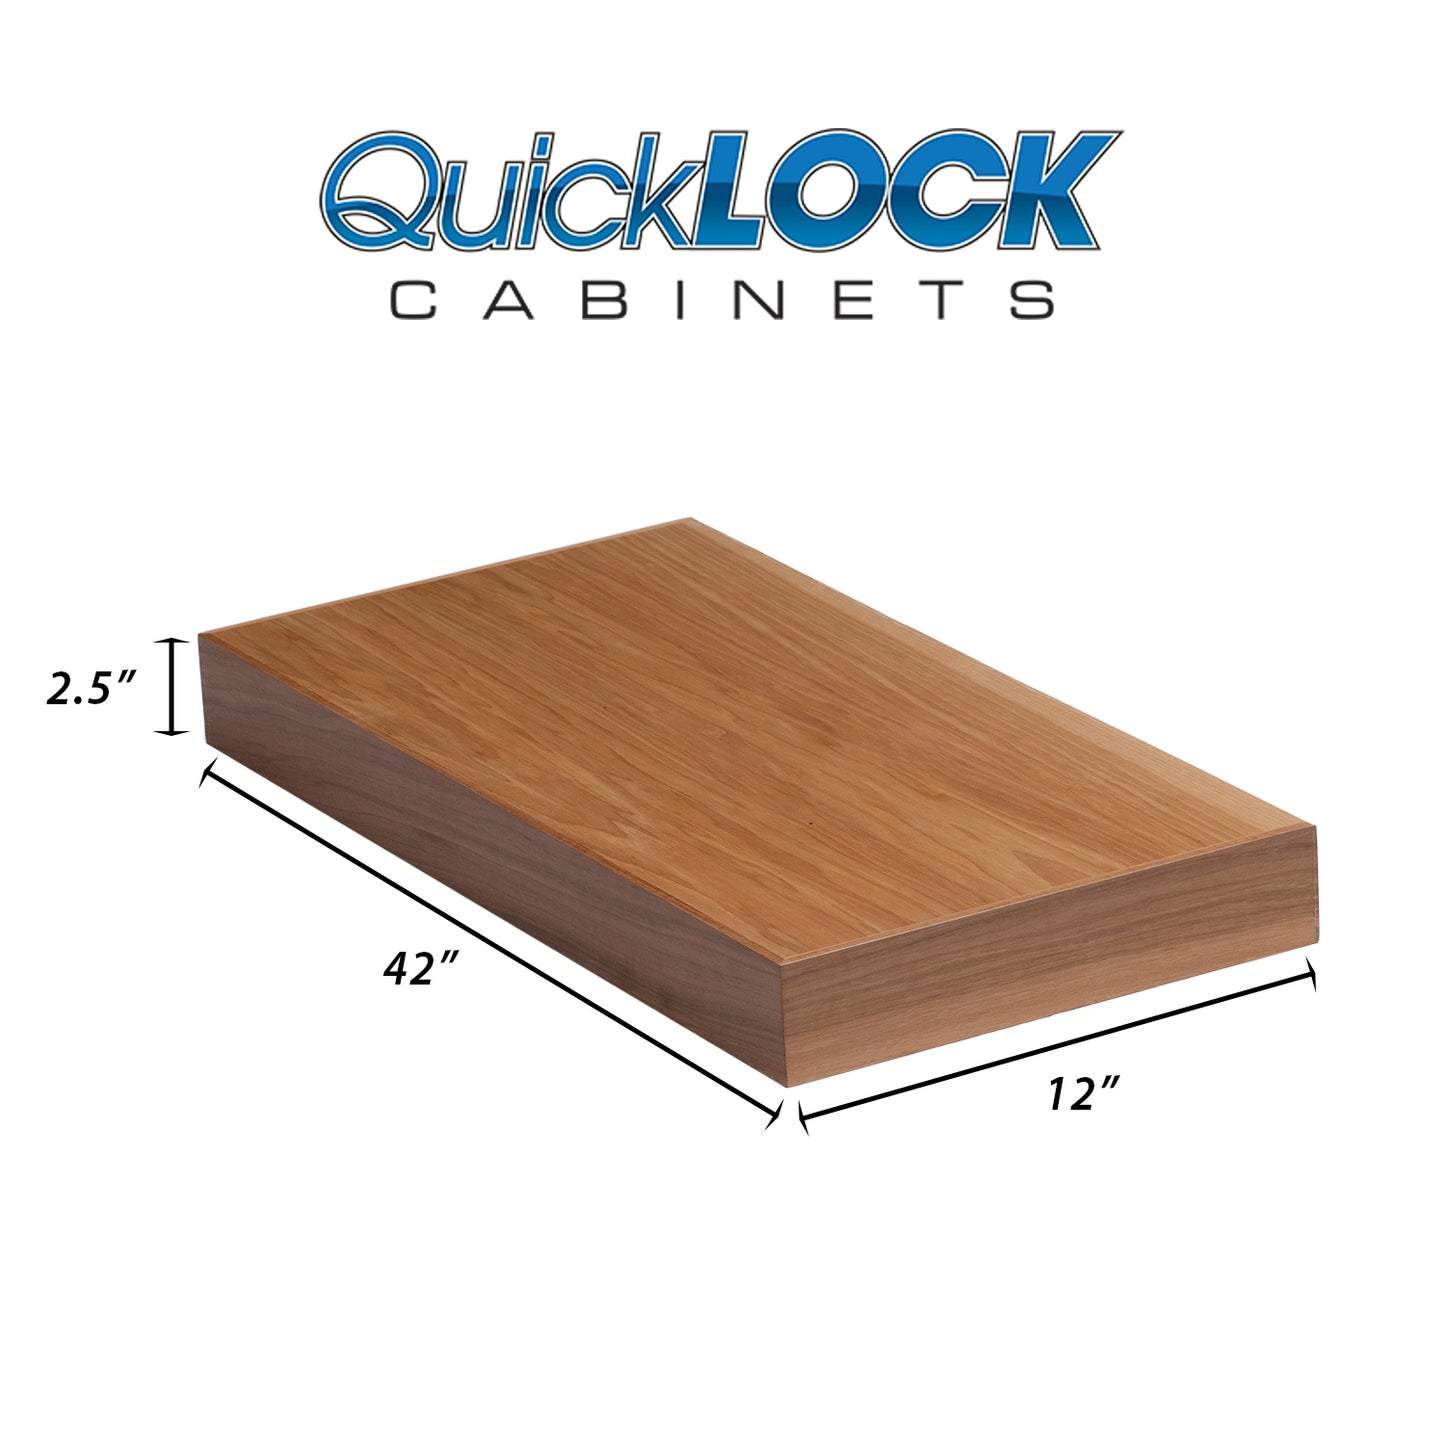 Quicklock Cabinets Floating Shelves | 2.5" Thick | Rustic Hickory, 12" D x 42" W x 2.5" H | American Made | Hardwood Bracket | Complete Shelf Unit